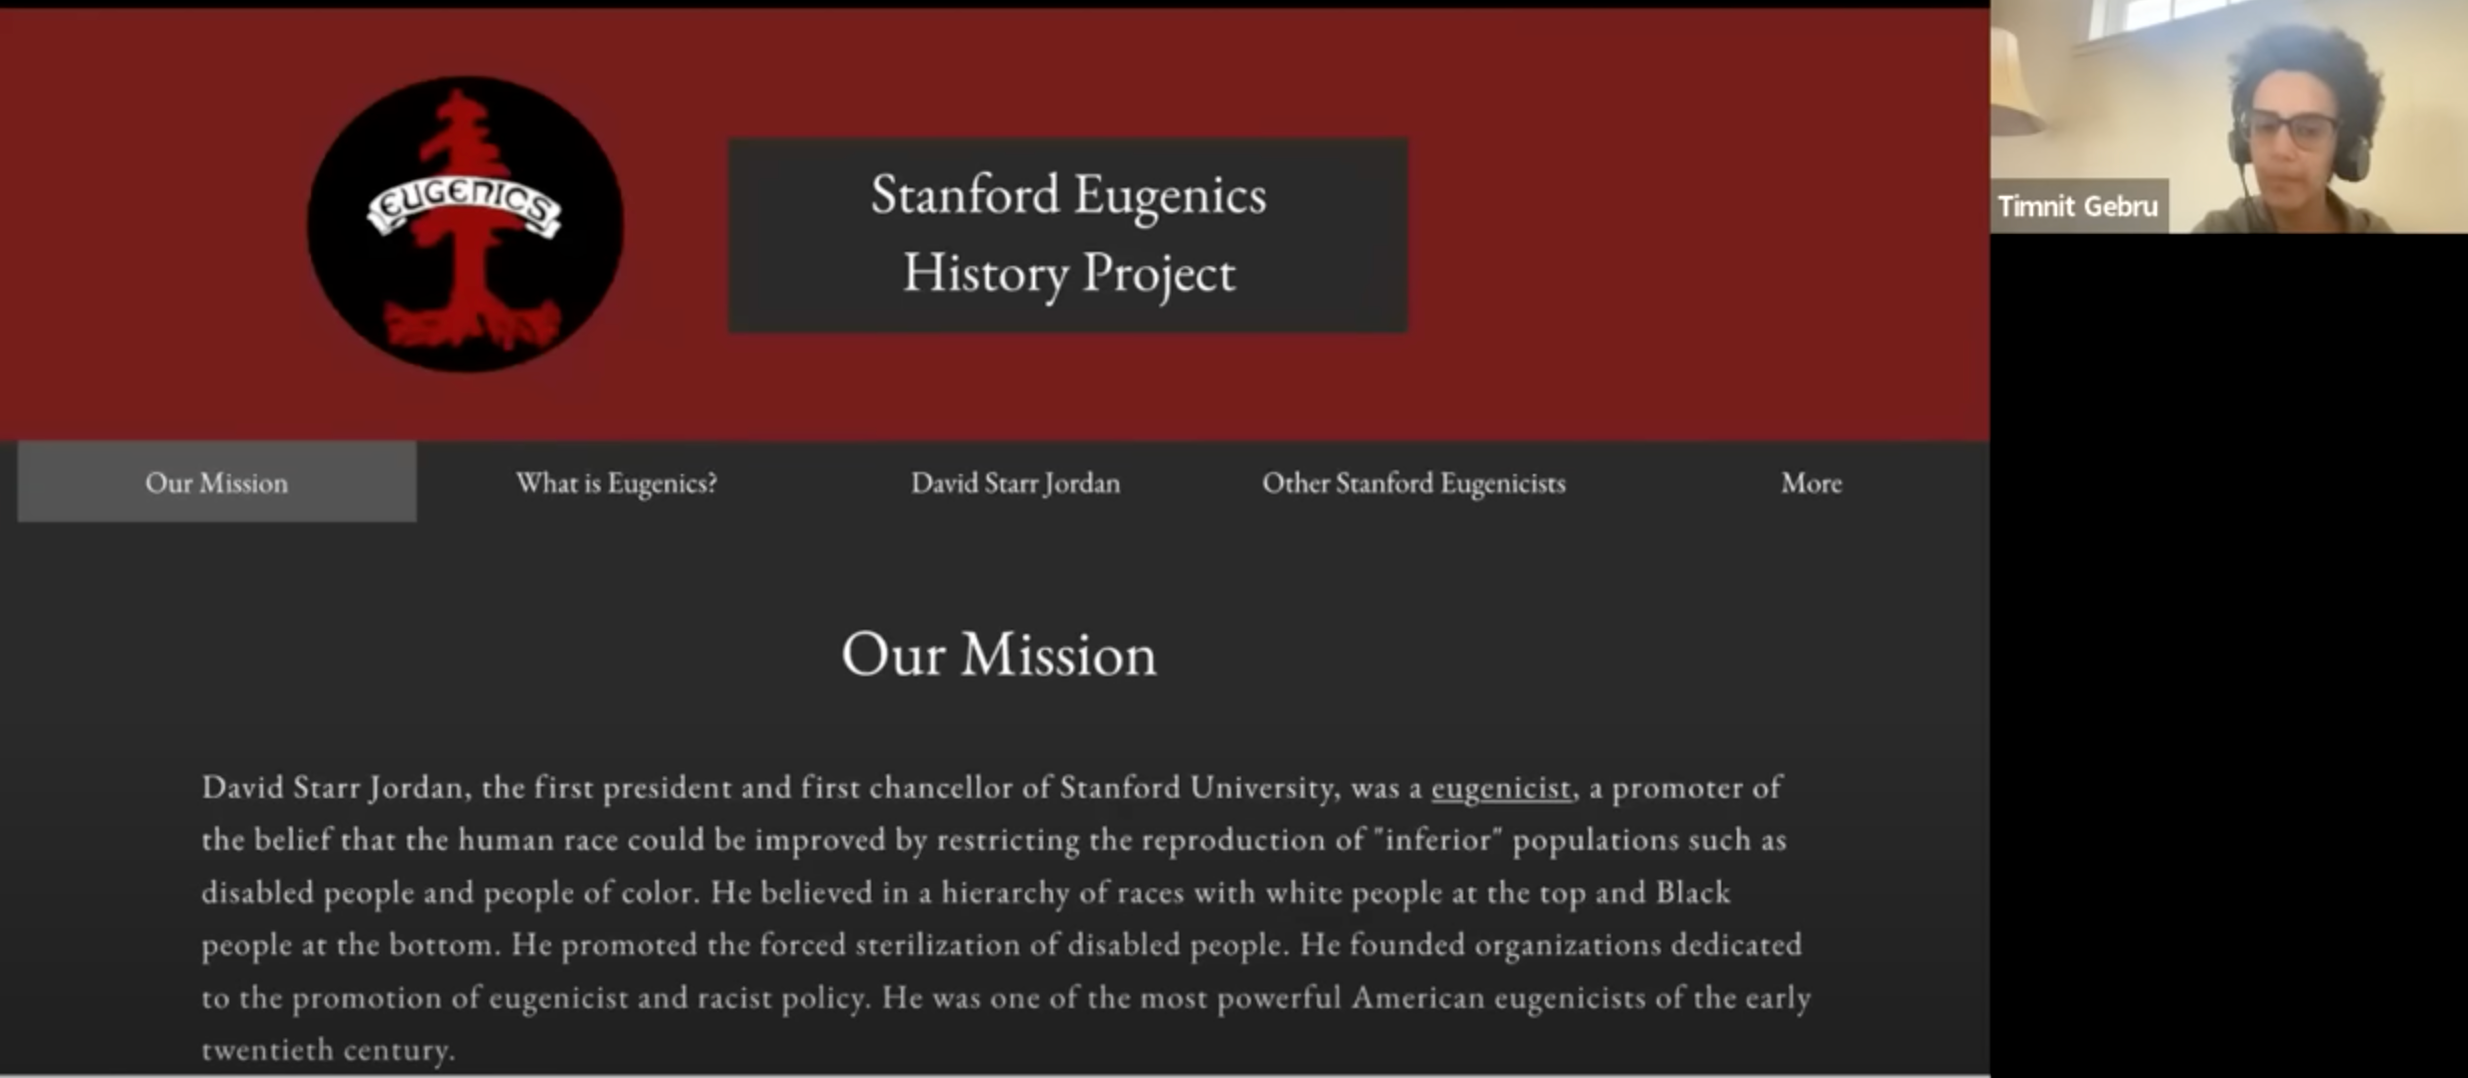 Screenshot of a Zoom lecture where the speaker's screen has been shared, currently showing a website for the Stanford Eugenics History Project. The website has a red header and a red and black logo of a tree with a banner across that says "EUGENICS." On a dark gray background, the text below the header reads, "Our Mission: David Starr Jordan, the first president and first chancellor of Stanford University, was a eugenicist, a promoter of the belief that the human race could be improved by restricting the reproduction of "inferior" populations such as disabled people and people of color." The text continues. On the right, a thumbnail image of Timnit speaking to her computer camera. The room behind her is off white and lit by daylight.